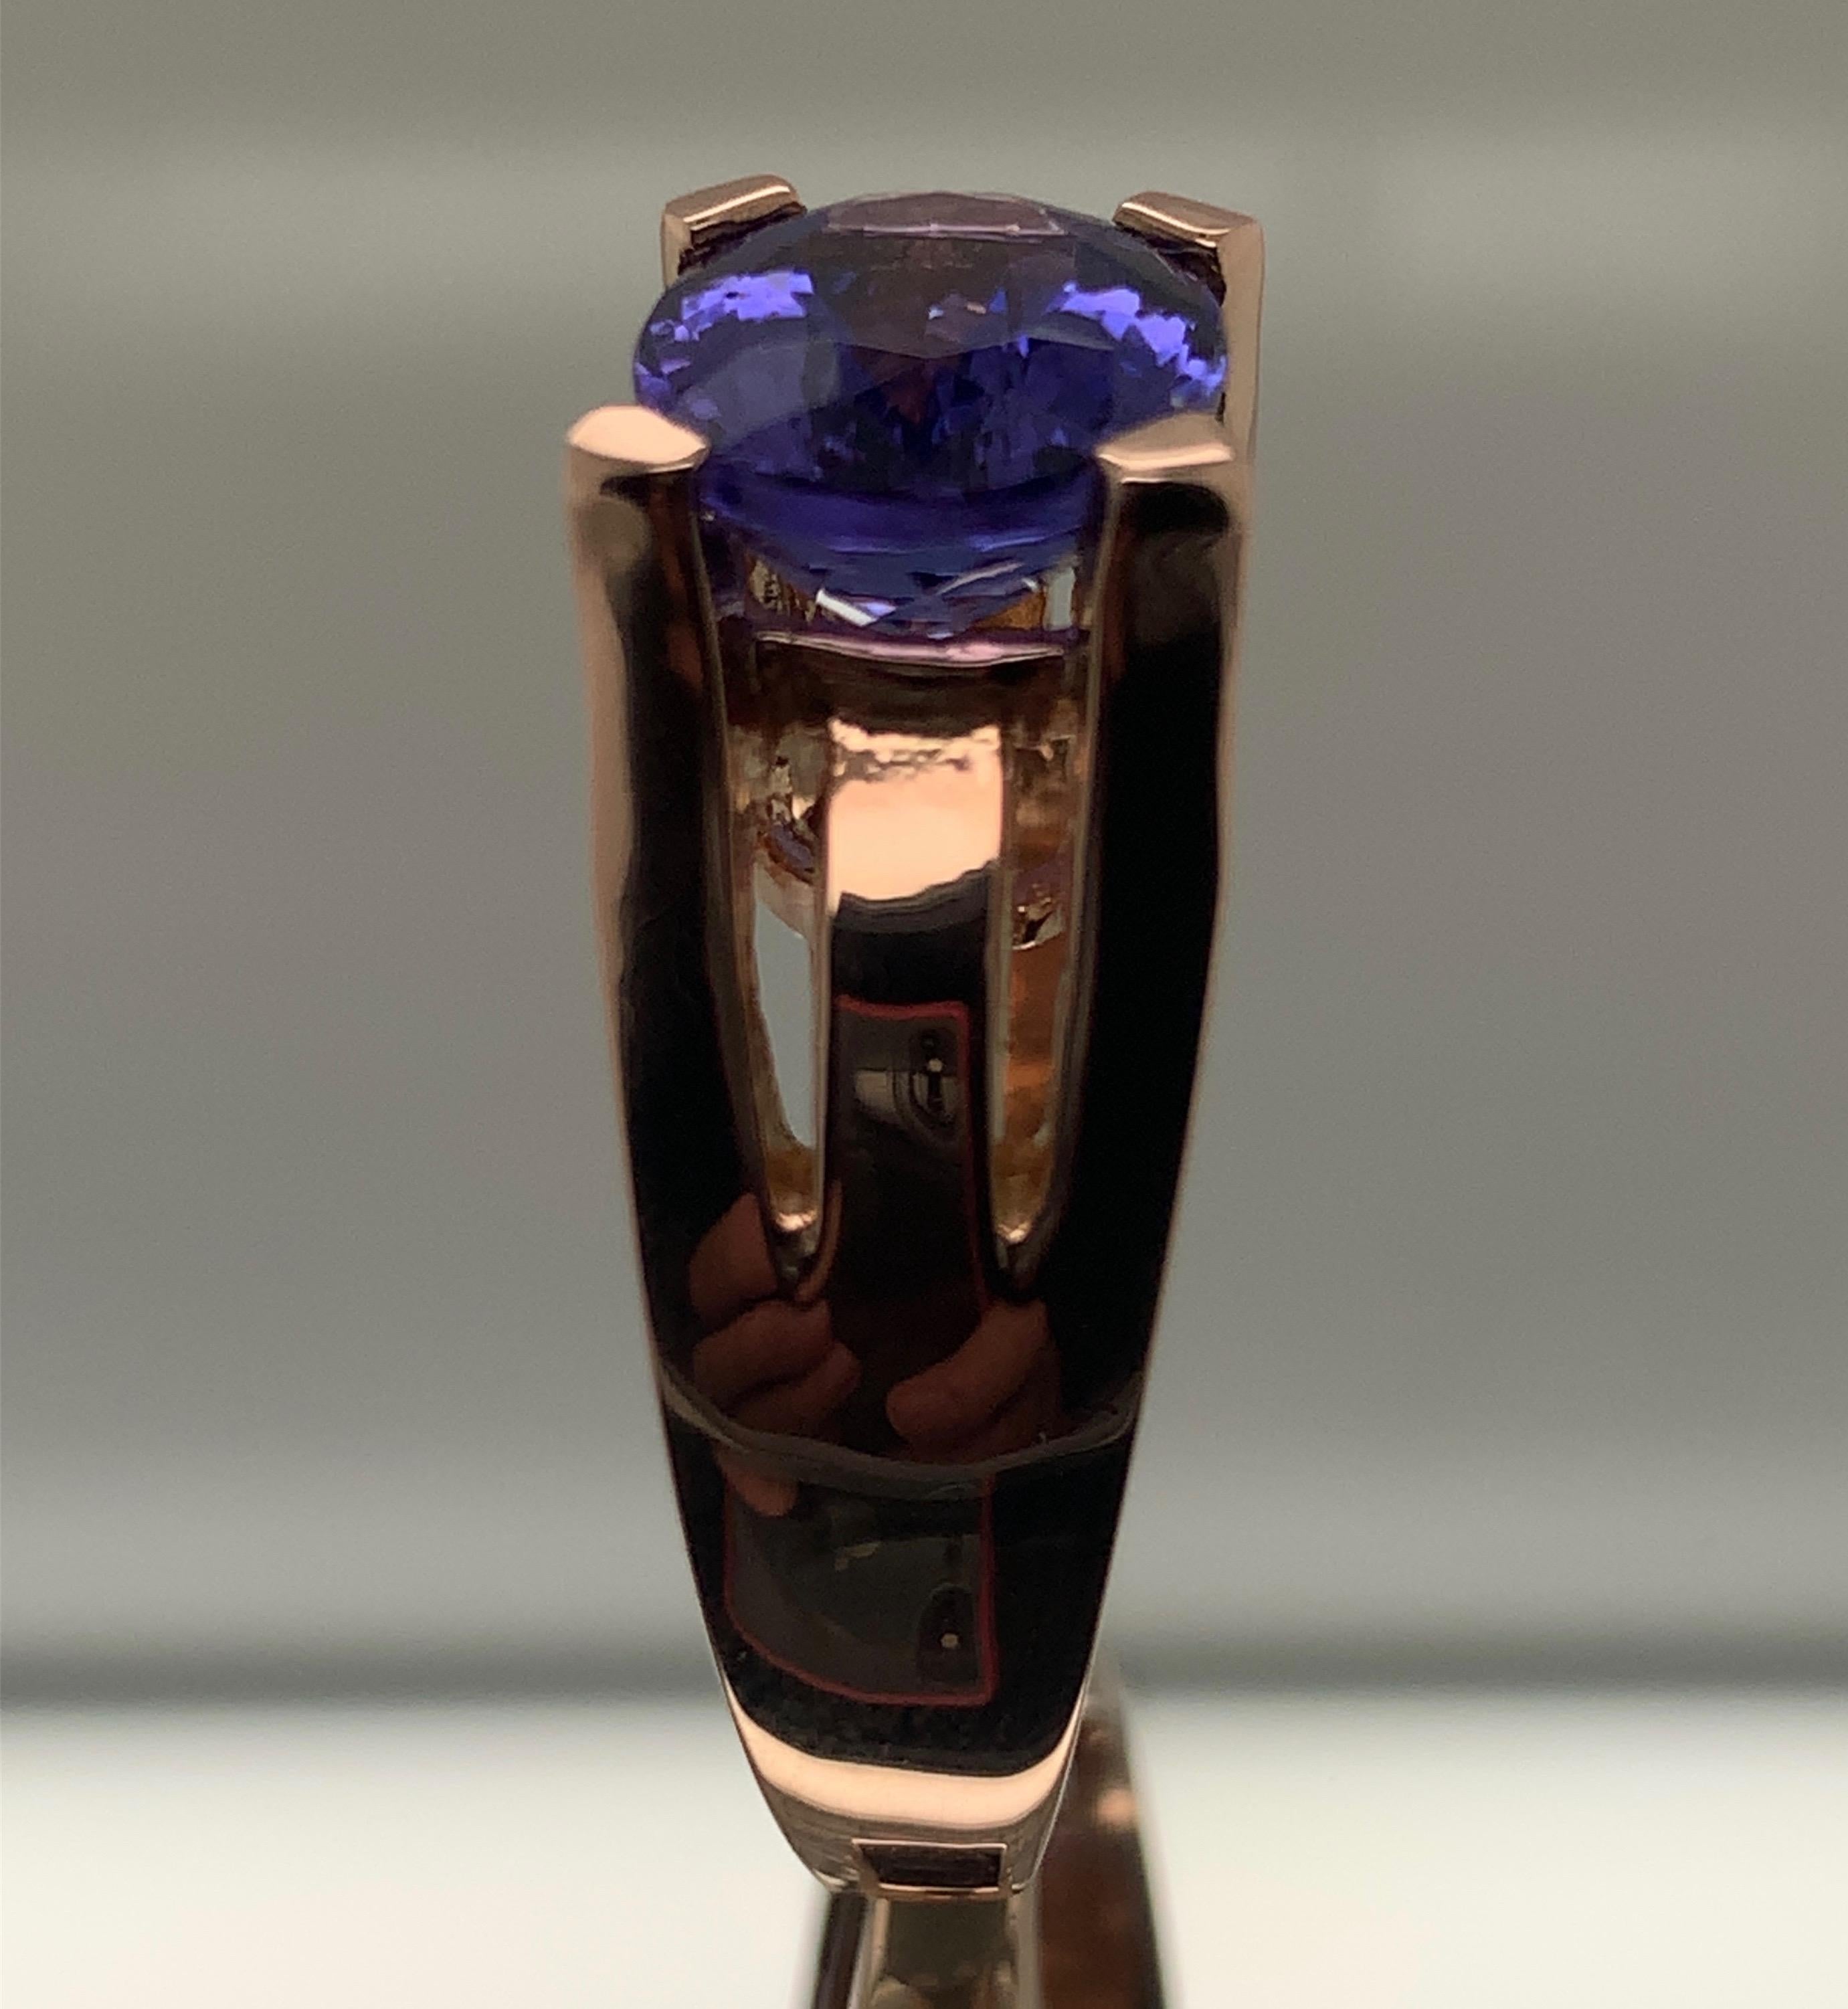 Tanzanite set in rose gold is one of our favorite things to do. 
This Tanzanite weighs 3.94 carats and is the characteristic blue / purple color of a typical Tanzanite. 
The ring is custom made  in 18-karat heavy rose gold. The ring is a size 6 3/4